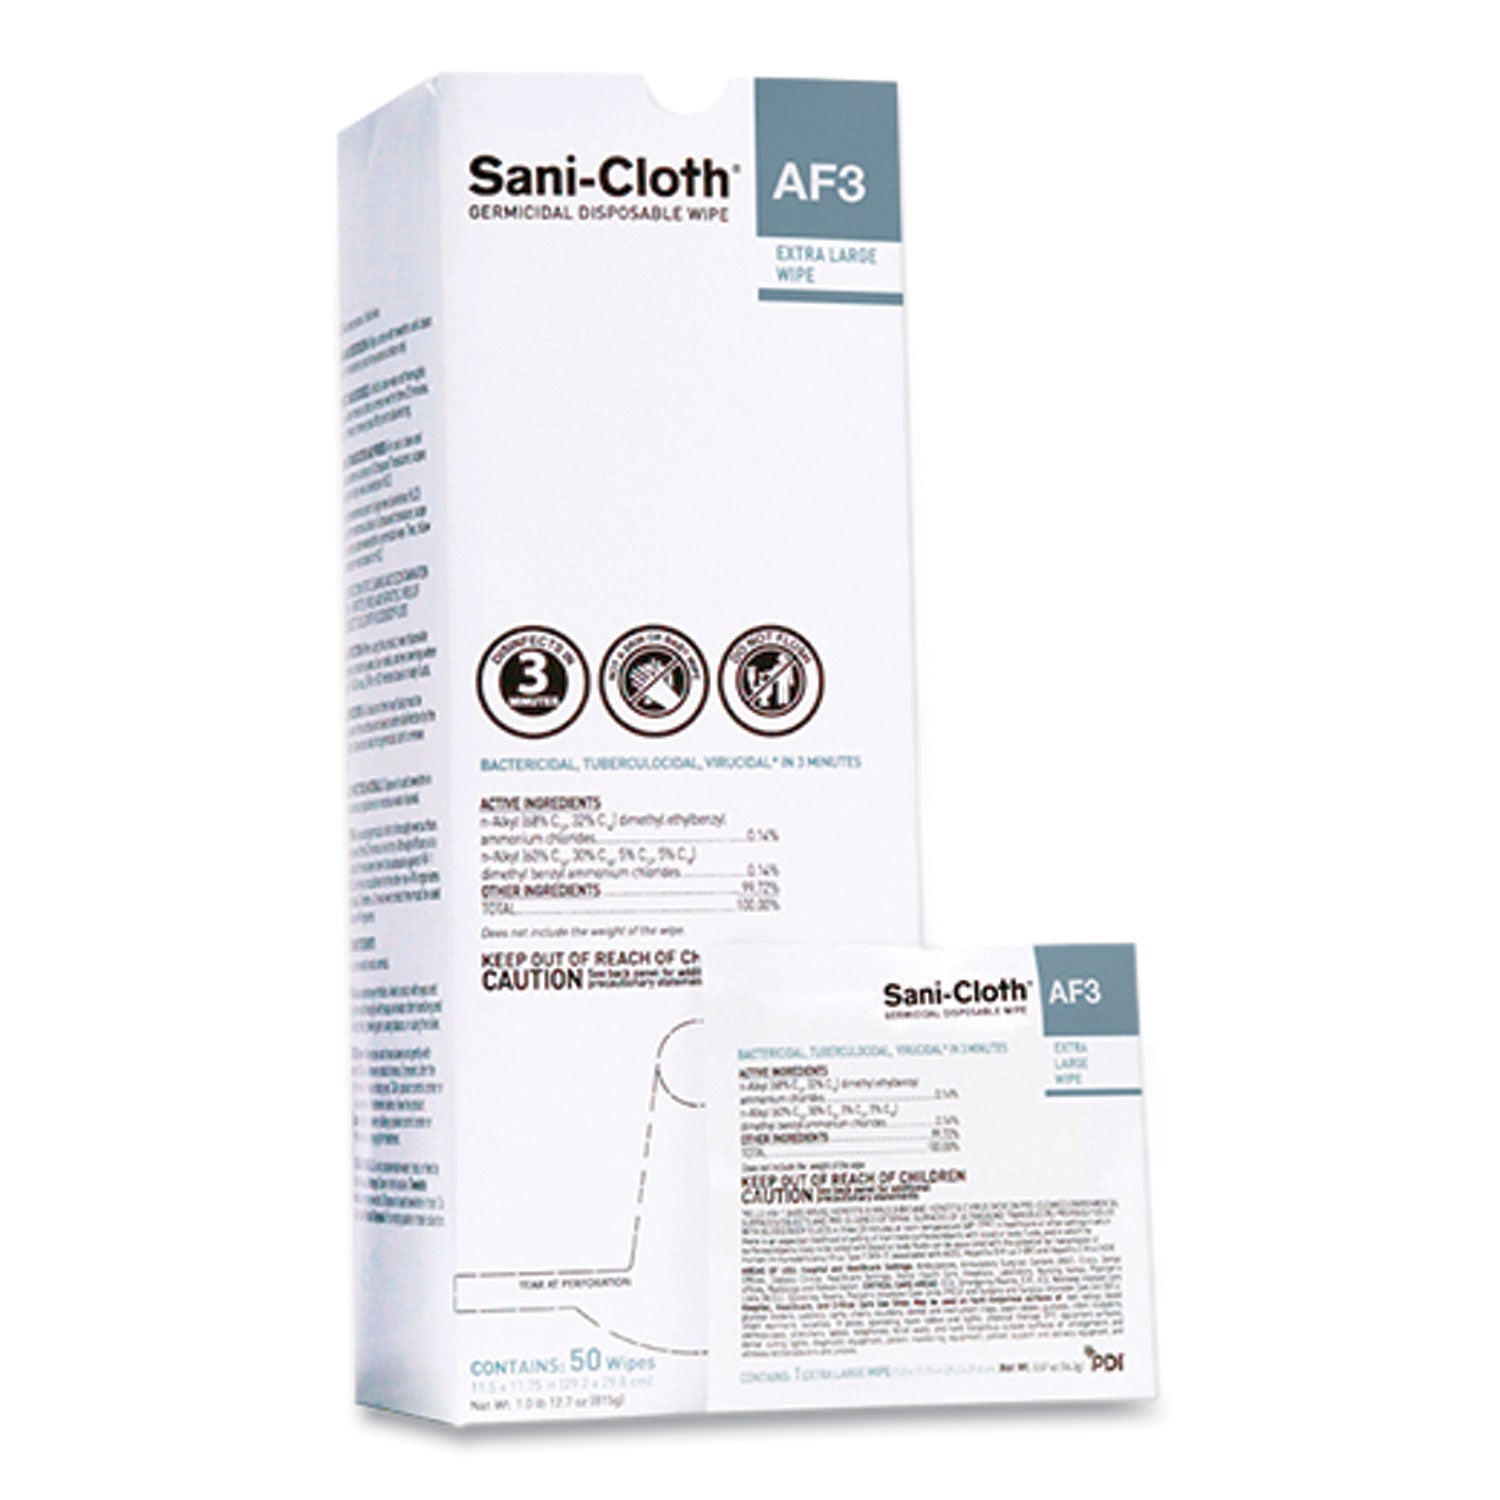 sani-cloth-af3-individually-wrapped-germicidal-disposable-wipes-x-large-1-ply-1175-x-115-unscented-white-50-box_pdiu27500 - 1